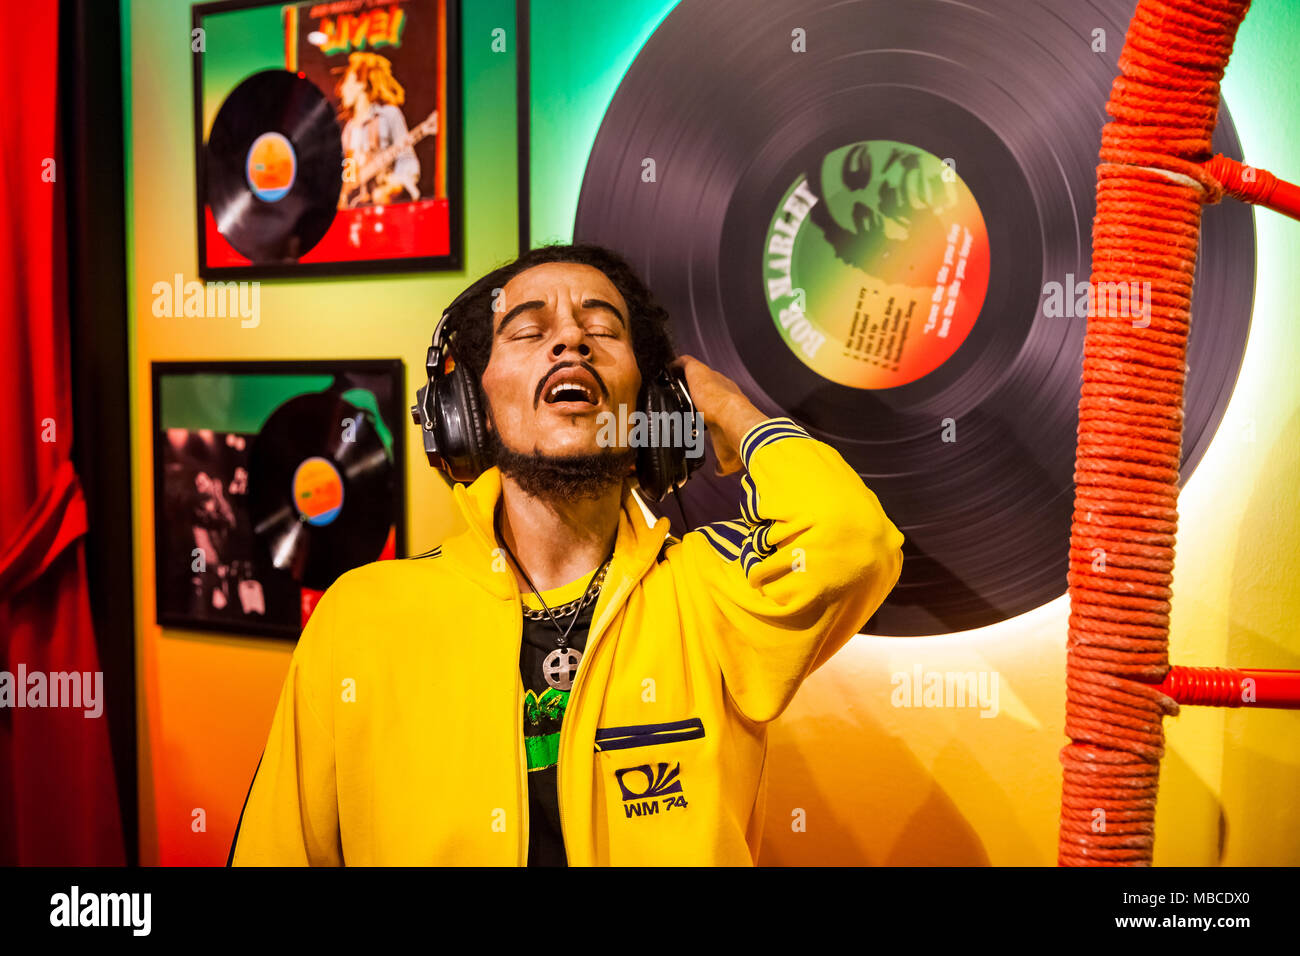 Wax figure of Bob Marley singer in Madame Tussauds Wax museum in Amsterdam, Netherlands Stock Photo